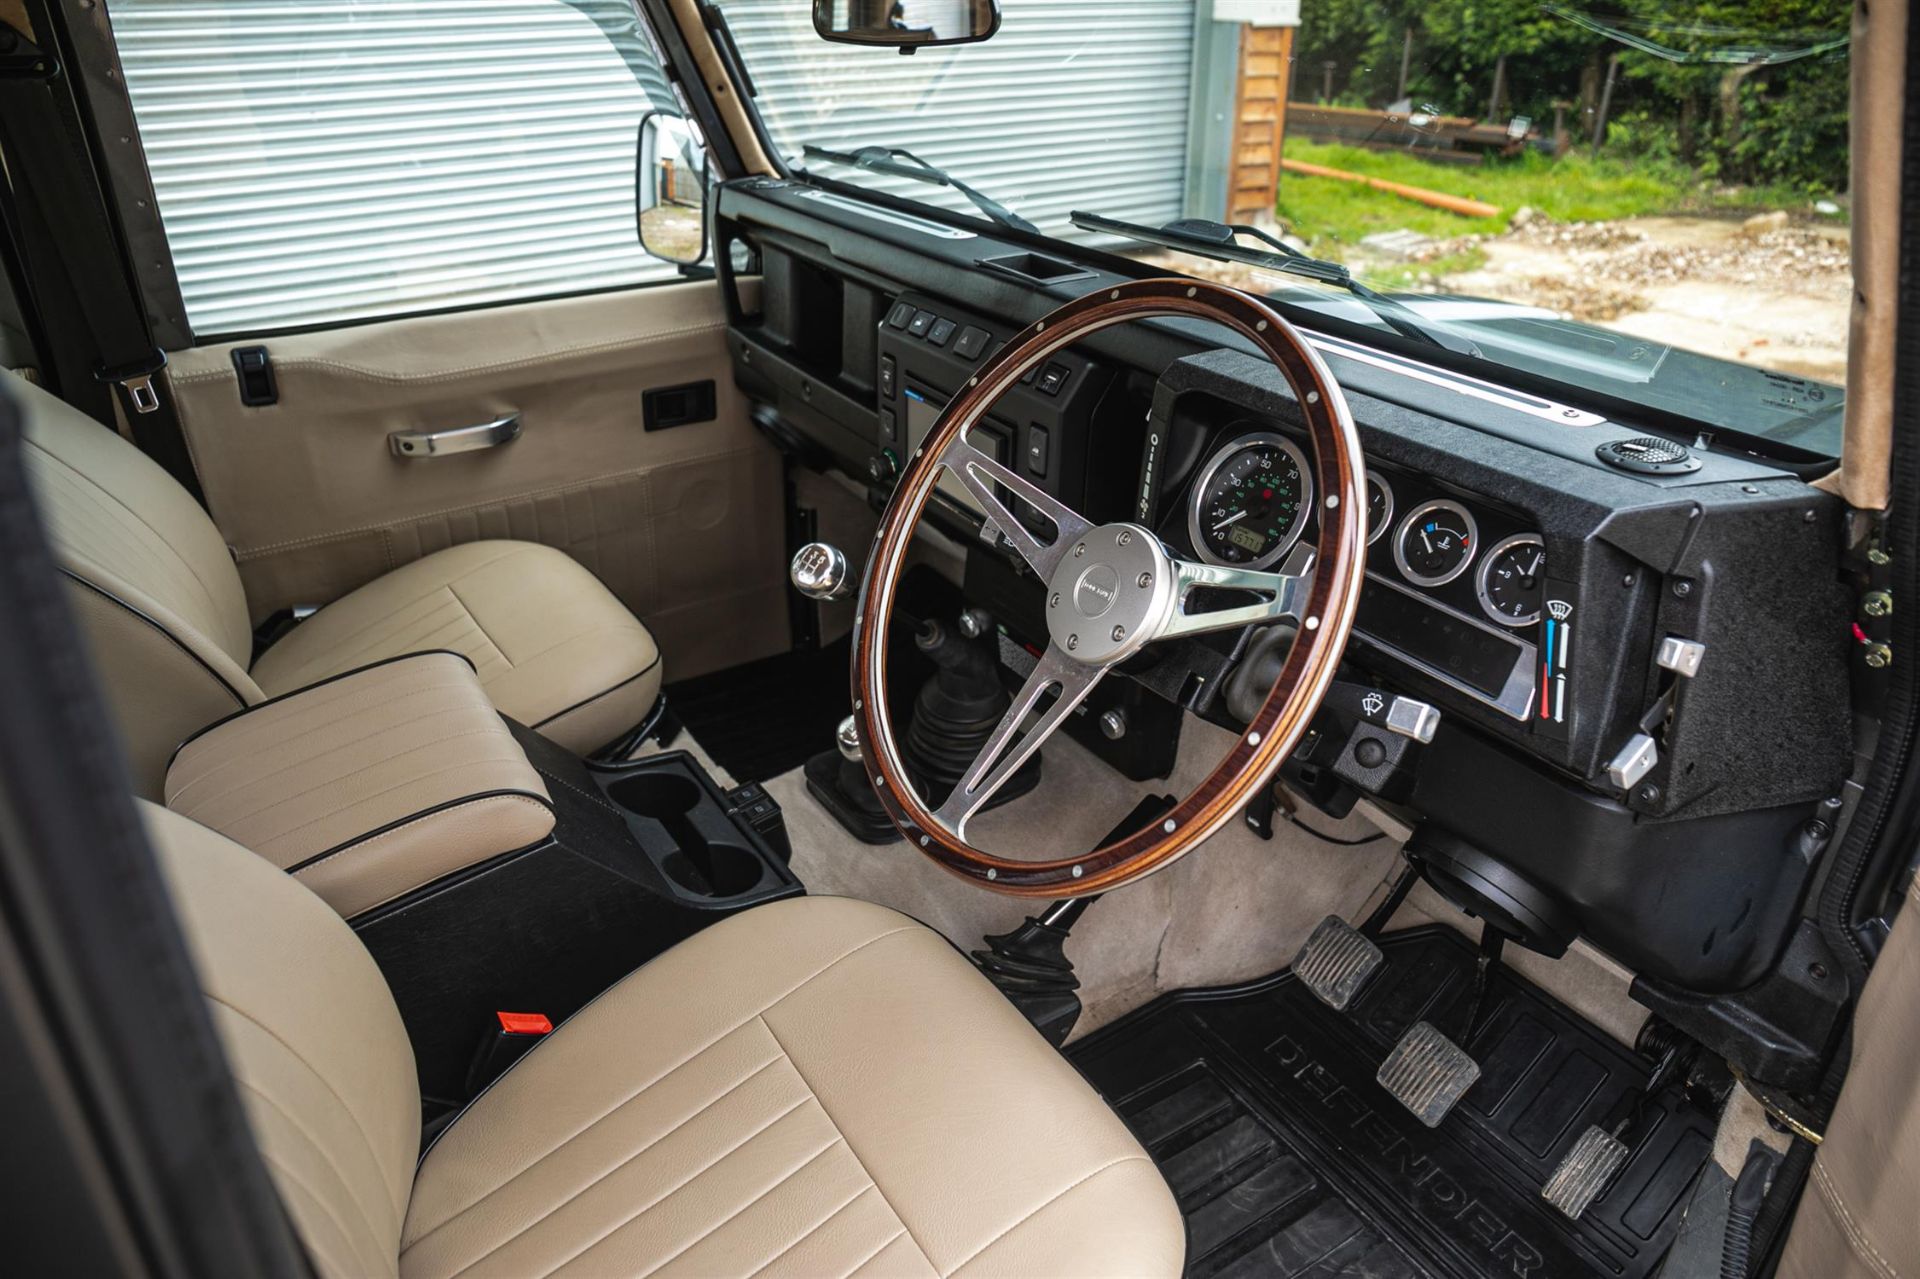 2002 Land Rover Defender 110 TD5 Double-Cab - Image 2 of 10